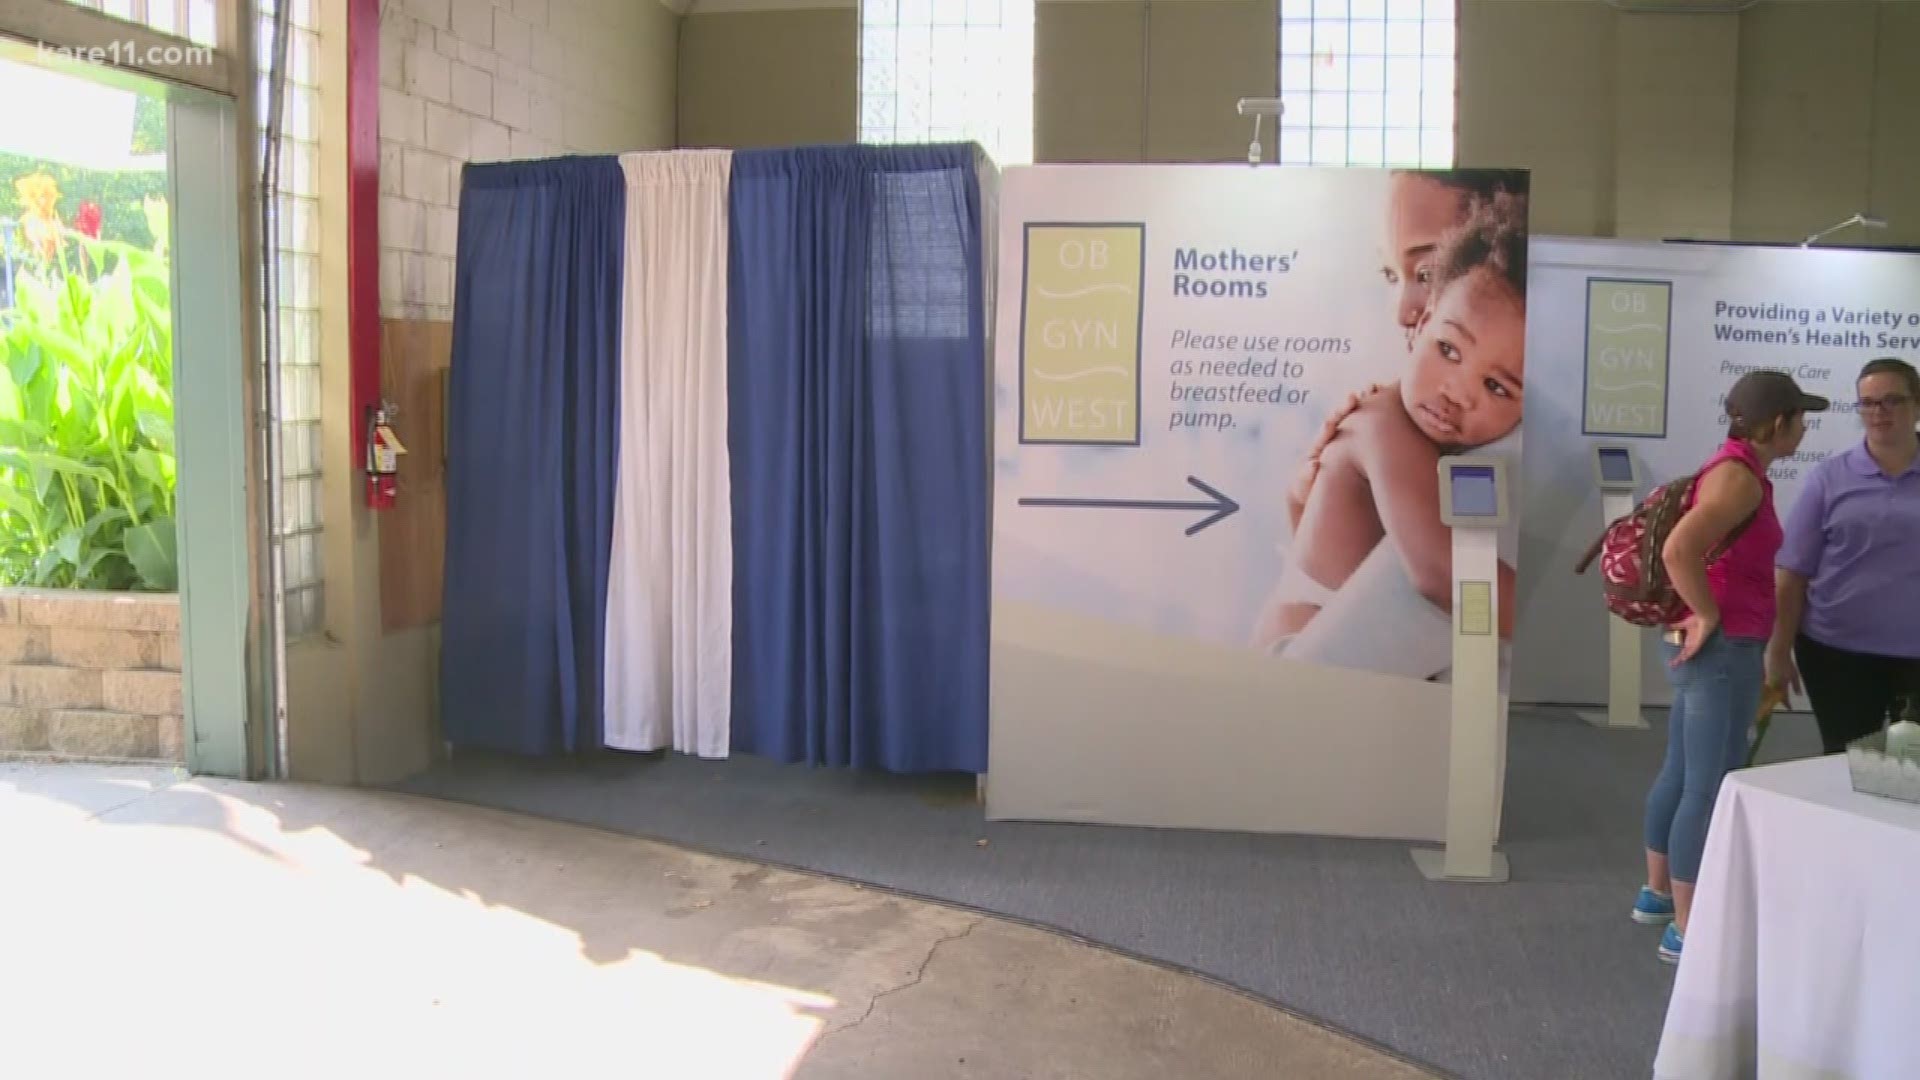 Back again this year at the Minnesota State Fair, OB GYN West offers nursing mother's private areas in the Healthfair 11 Building.